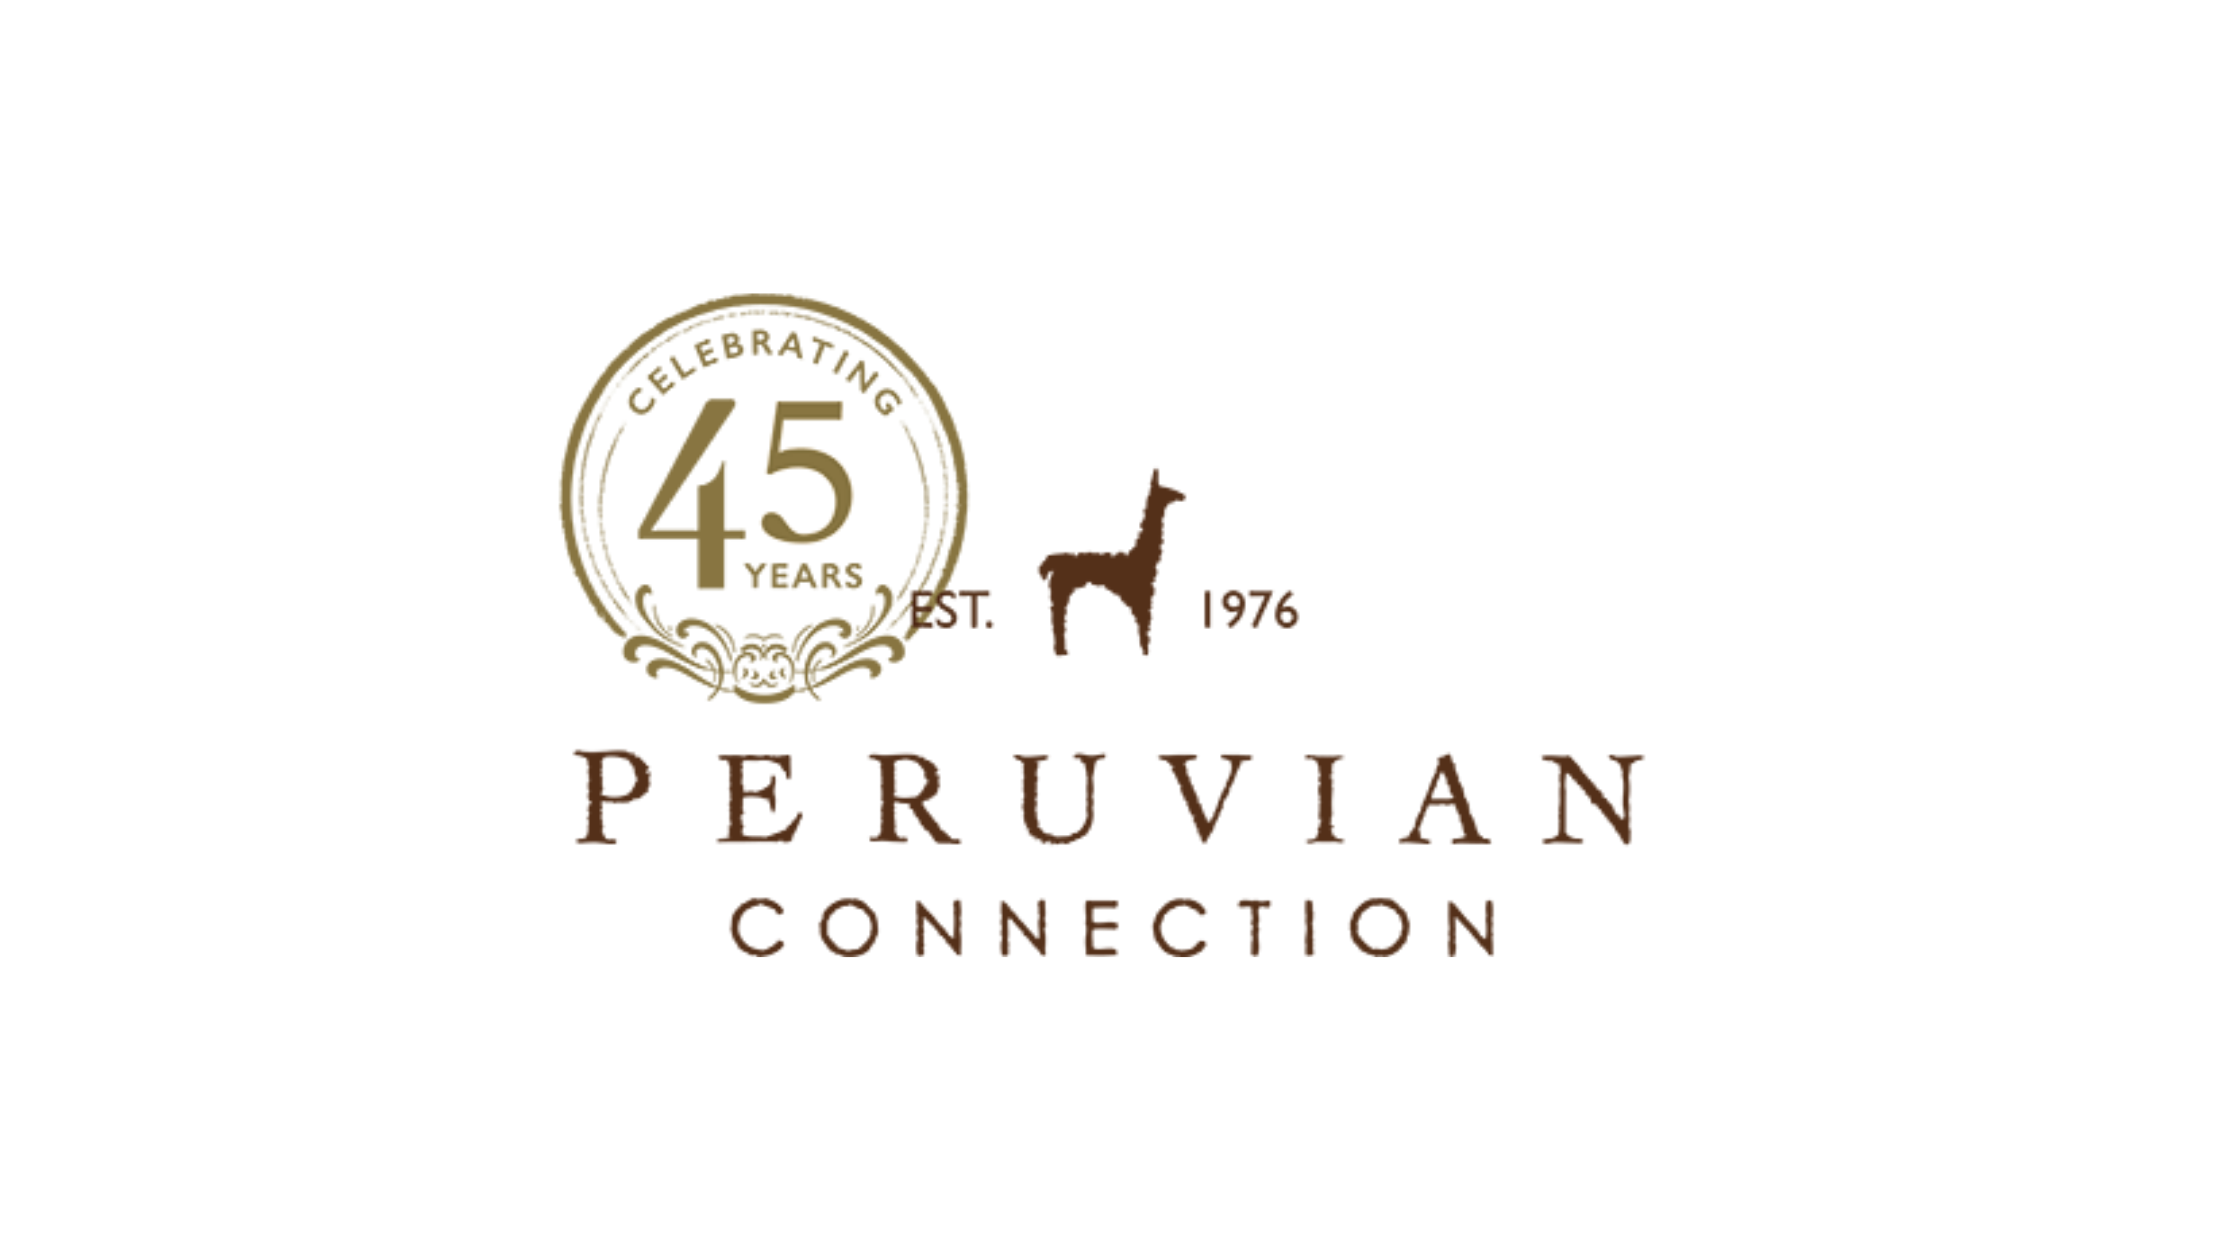  Peruvian Connection increased in-store sales by 25% within 30 days of launching the Salesfloor platform.